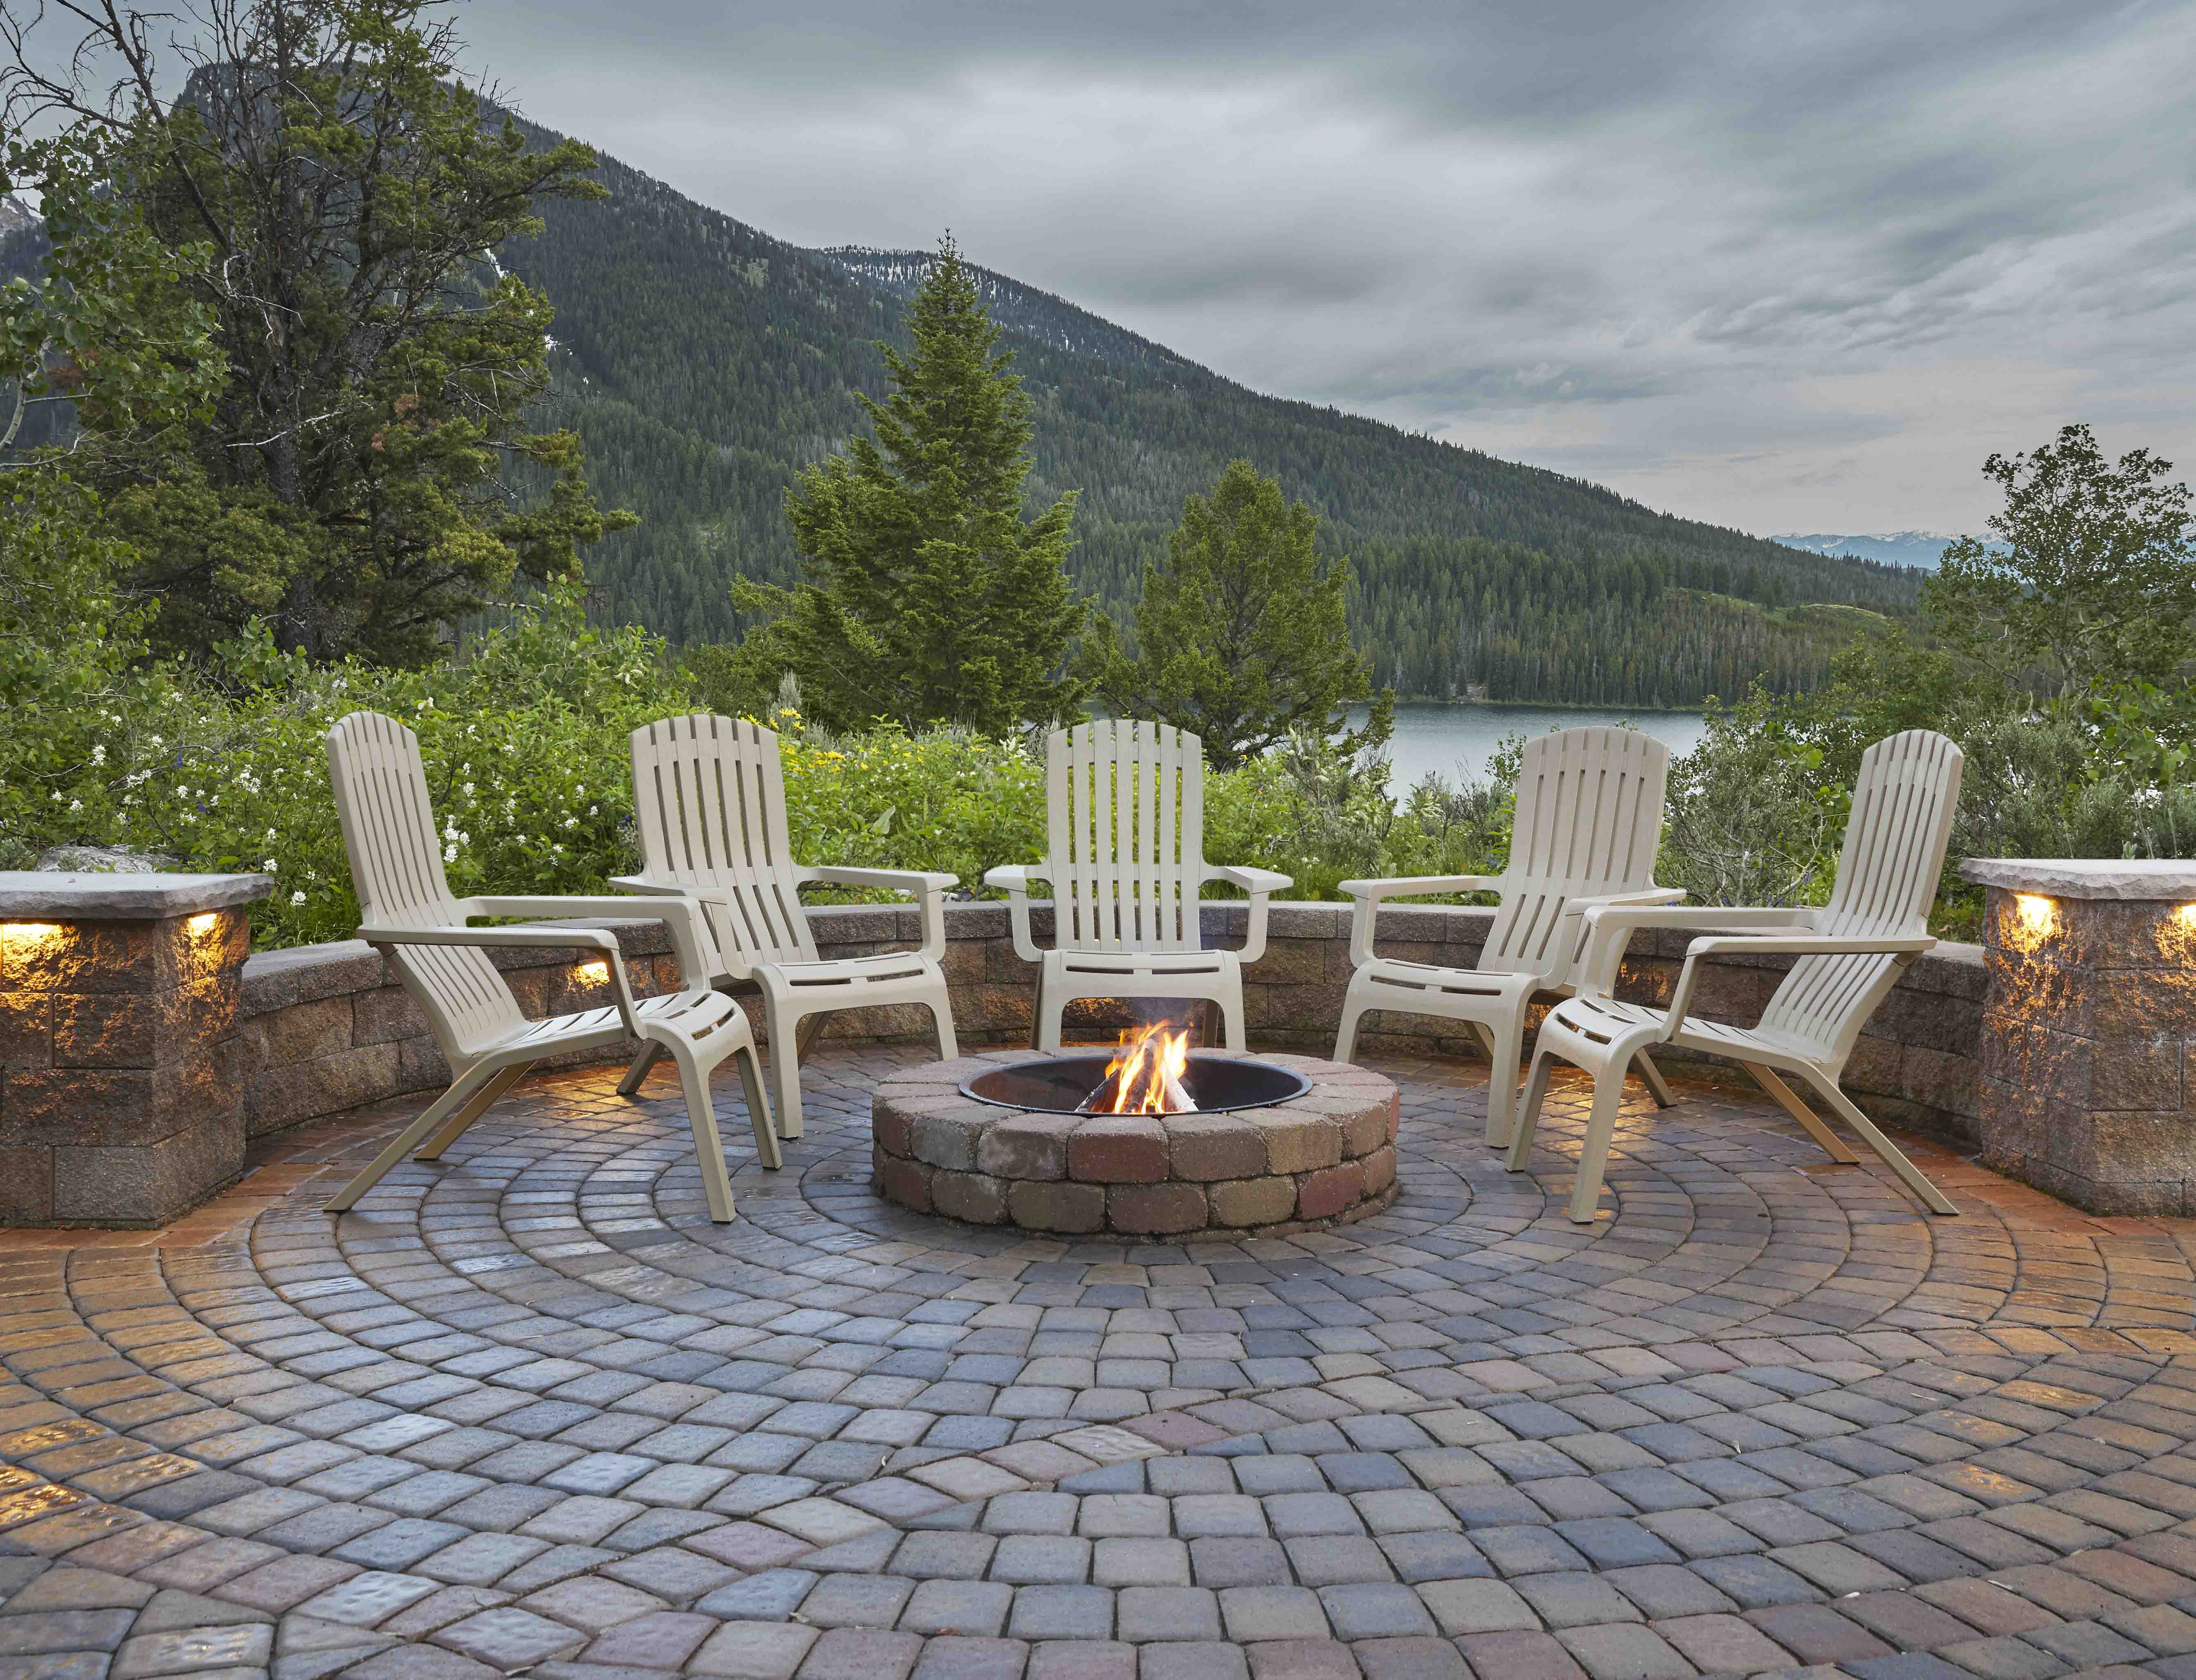 outdoor chairs around patio firepit with lake and mountains